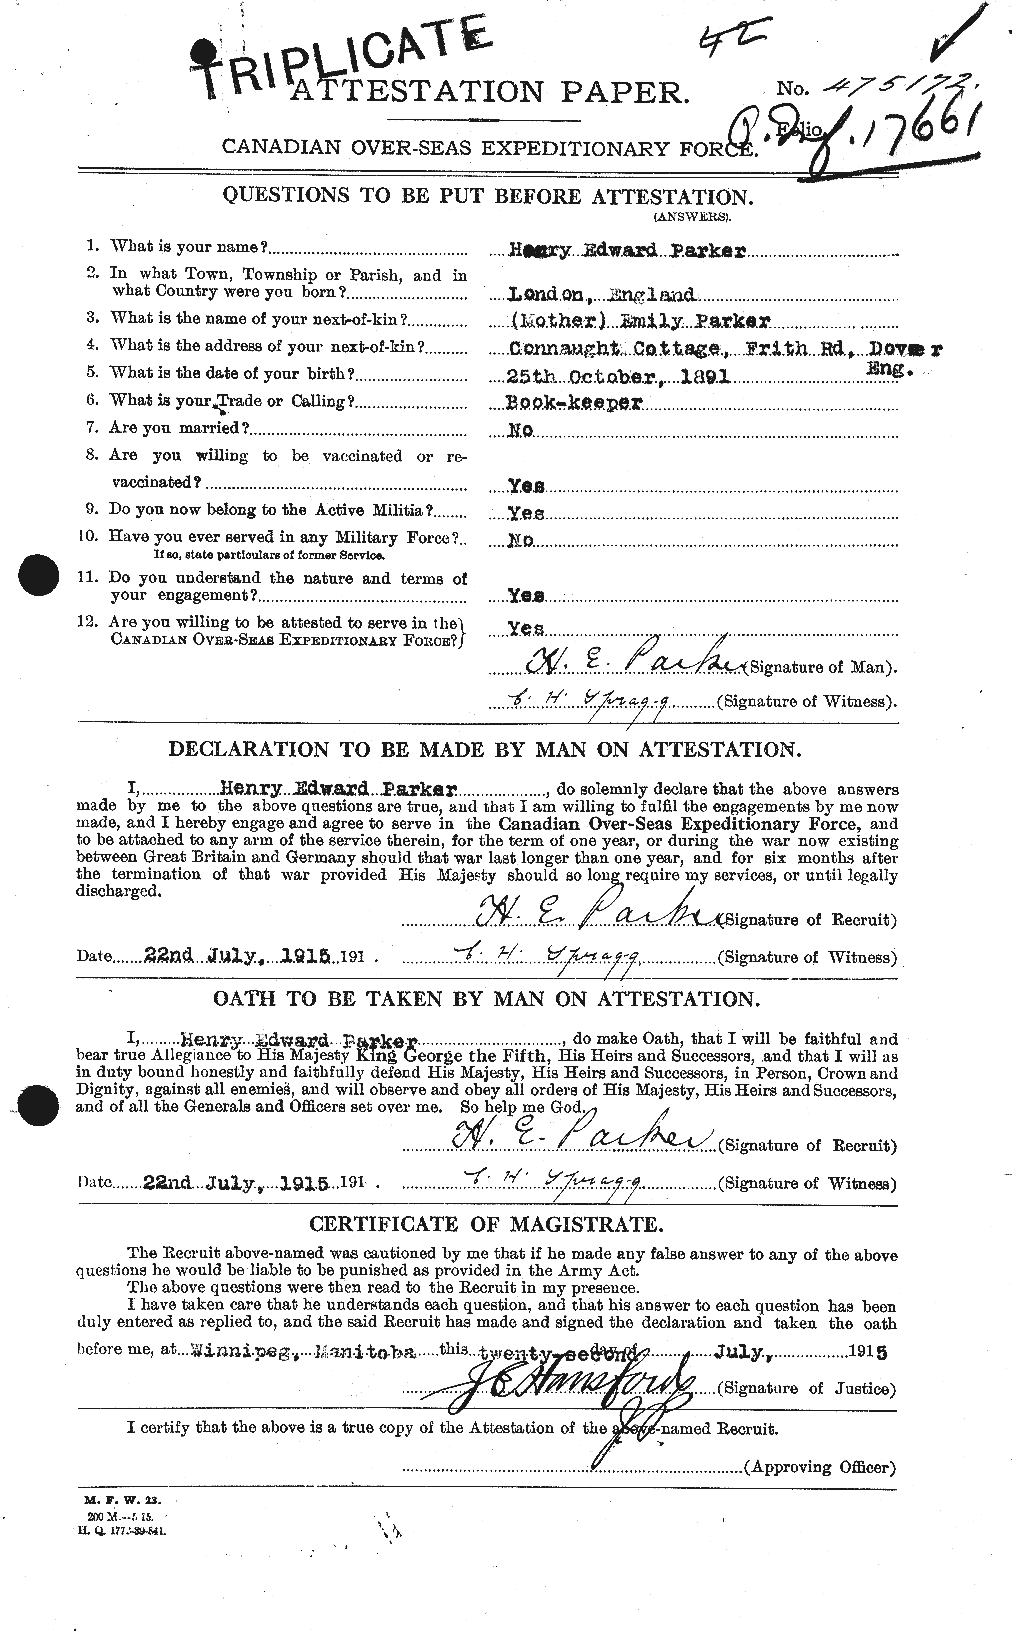 Personnel Records of the First World War - CEF 565352a